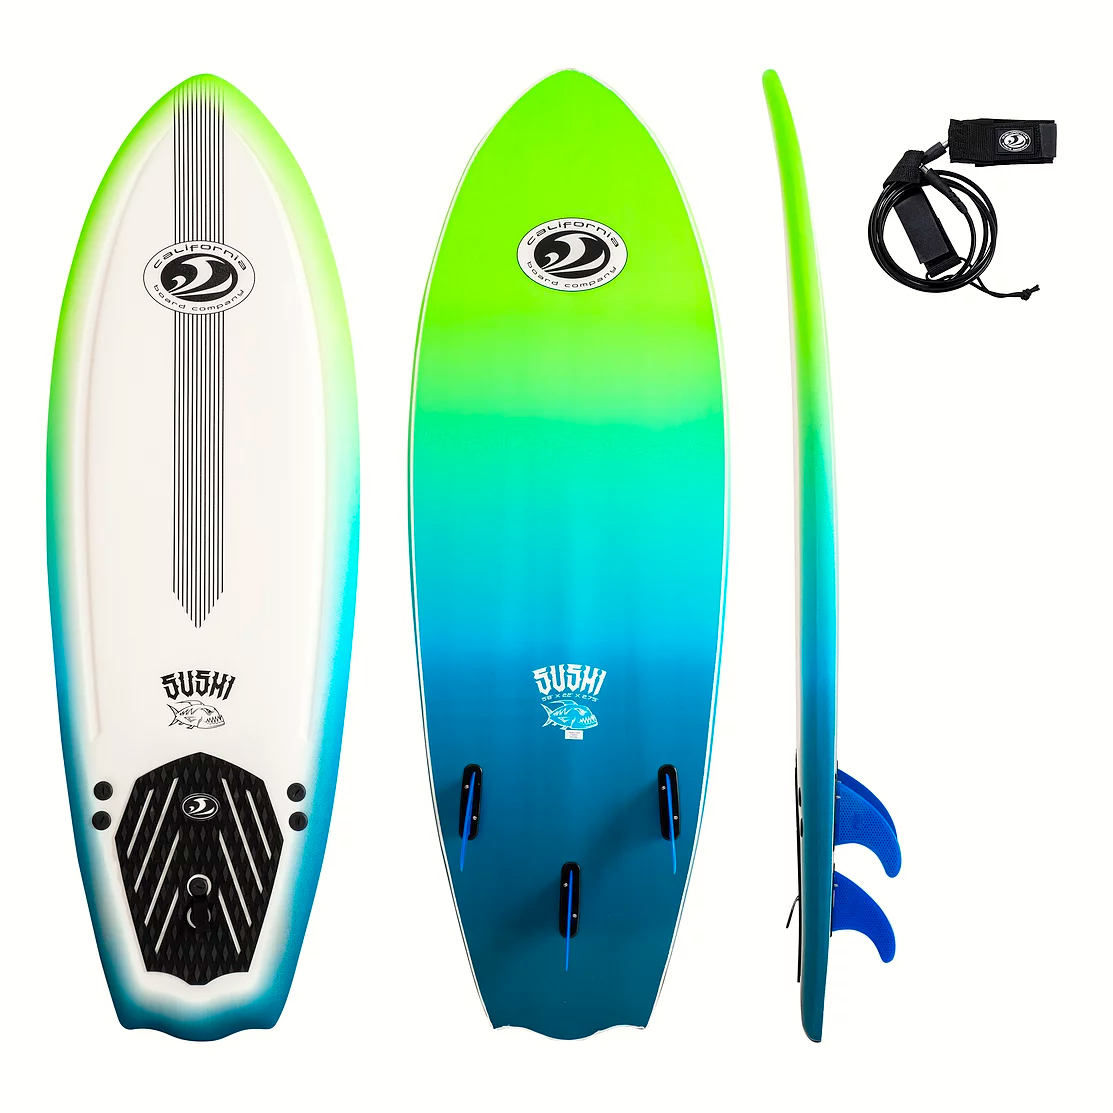 CBC Sushi Softboard 2021 The most used surfboards for children and